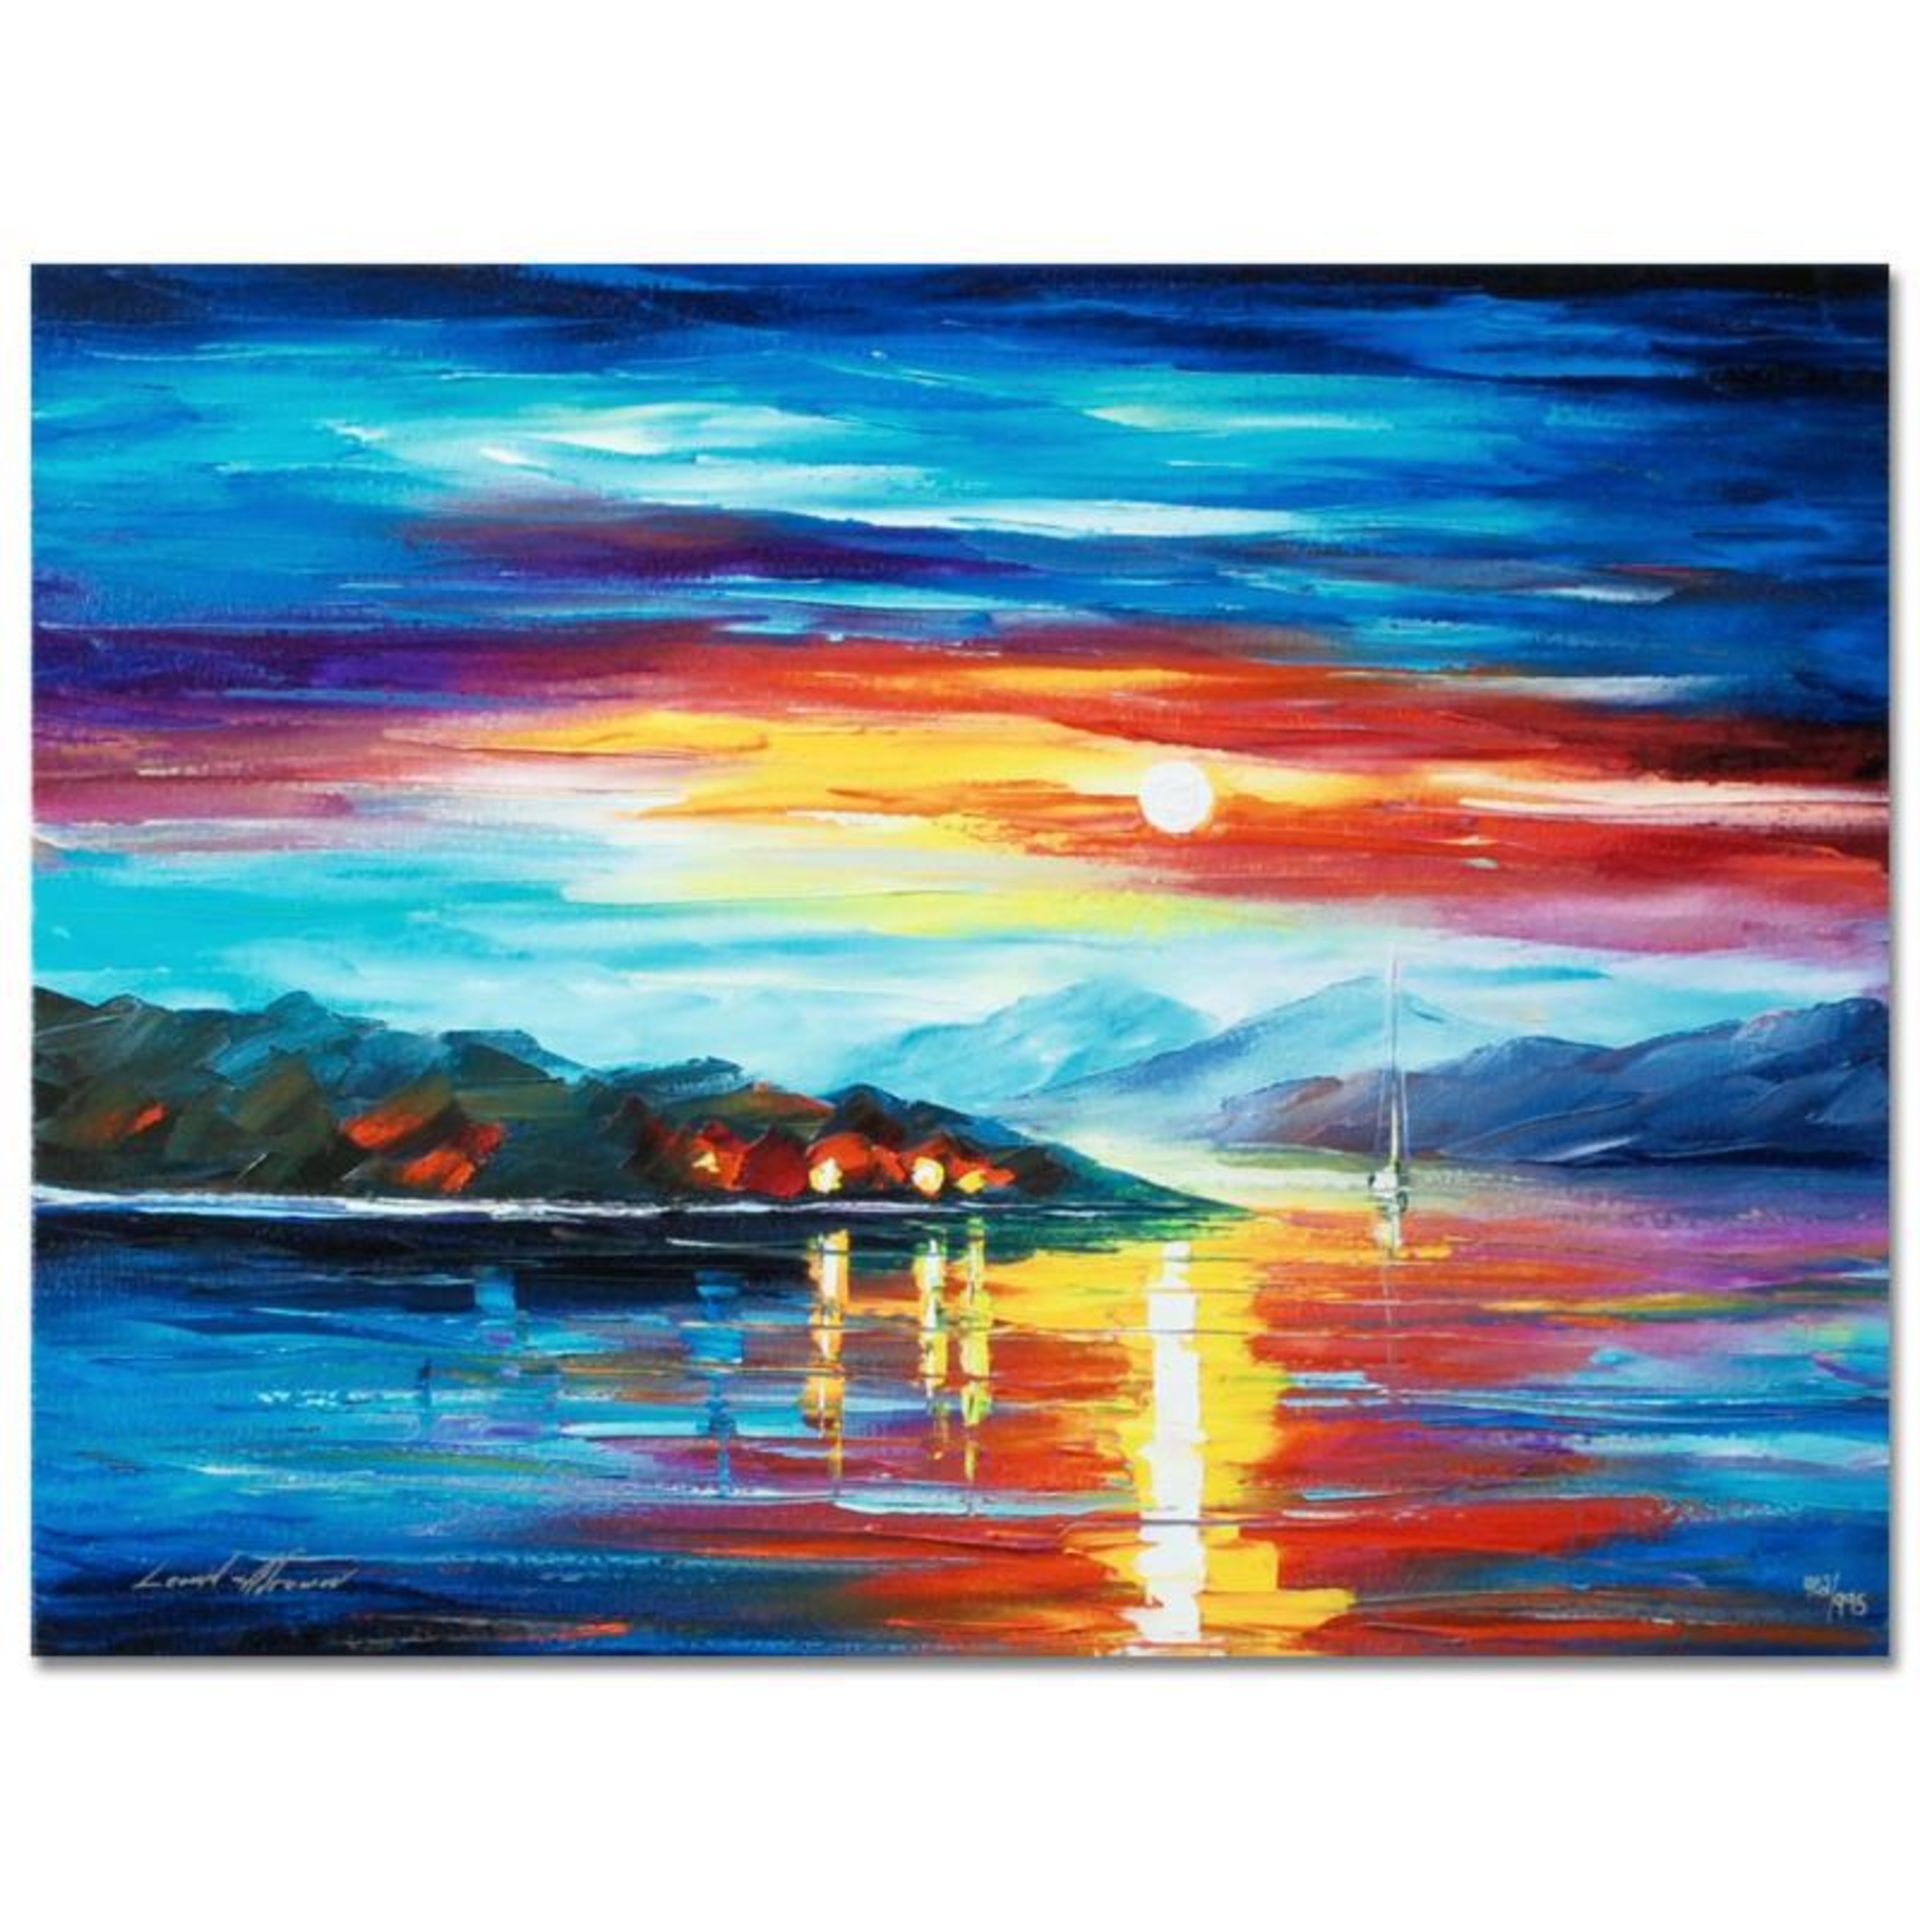 Leonid Afremov (1955-2019) "Never Alone" Limited Edition Giclee on Canvas, Numbe